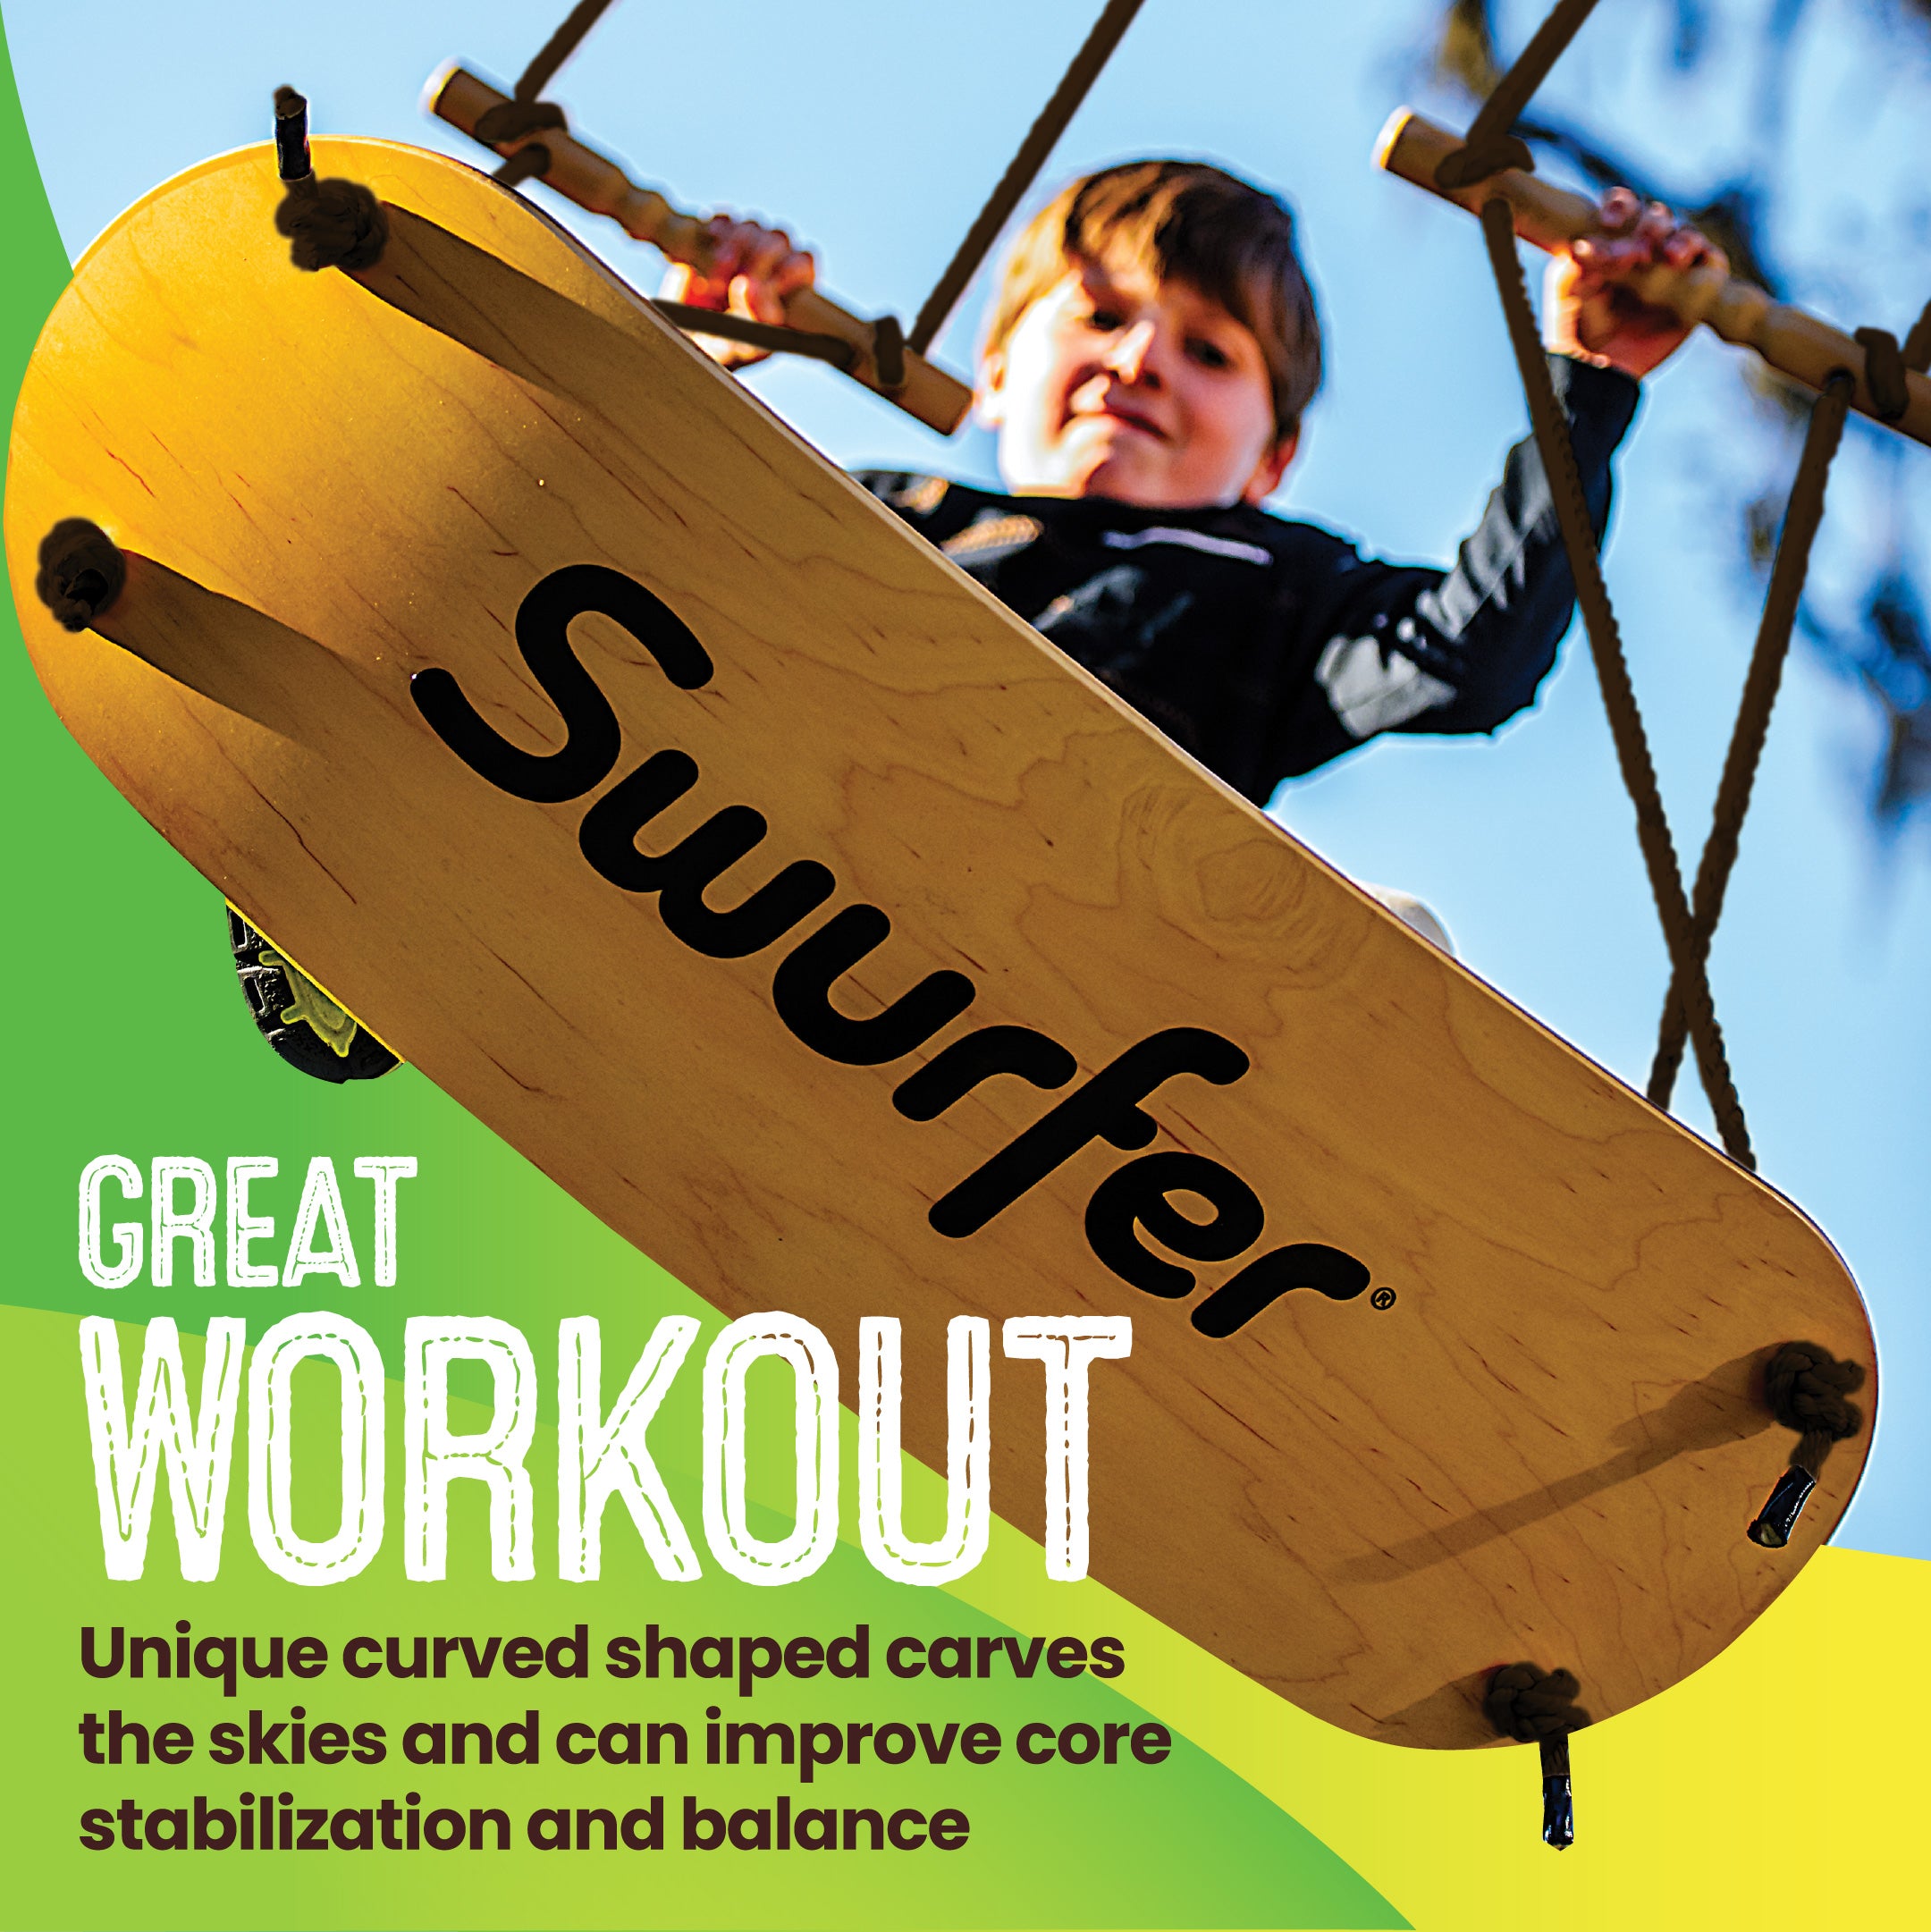 Swurfer Original Stand Up Surfing Tree Swing – Flybar